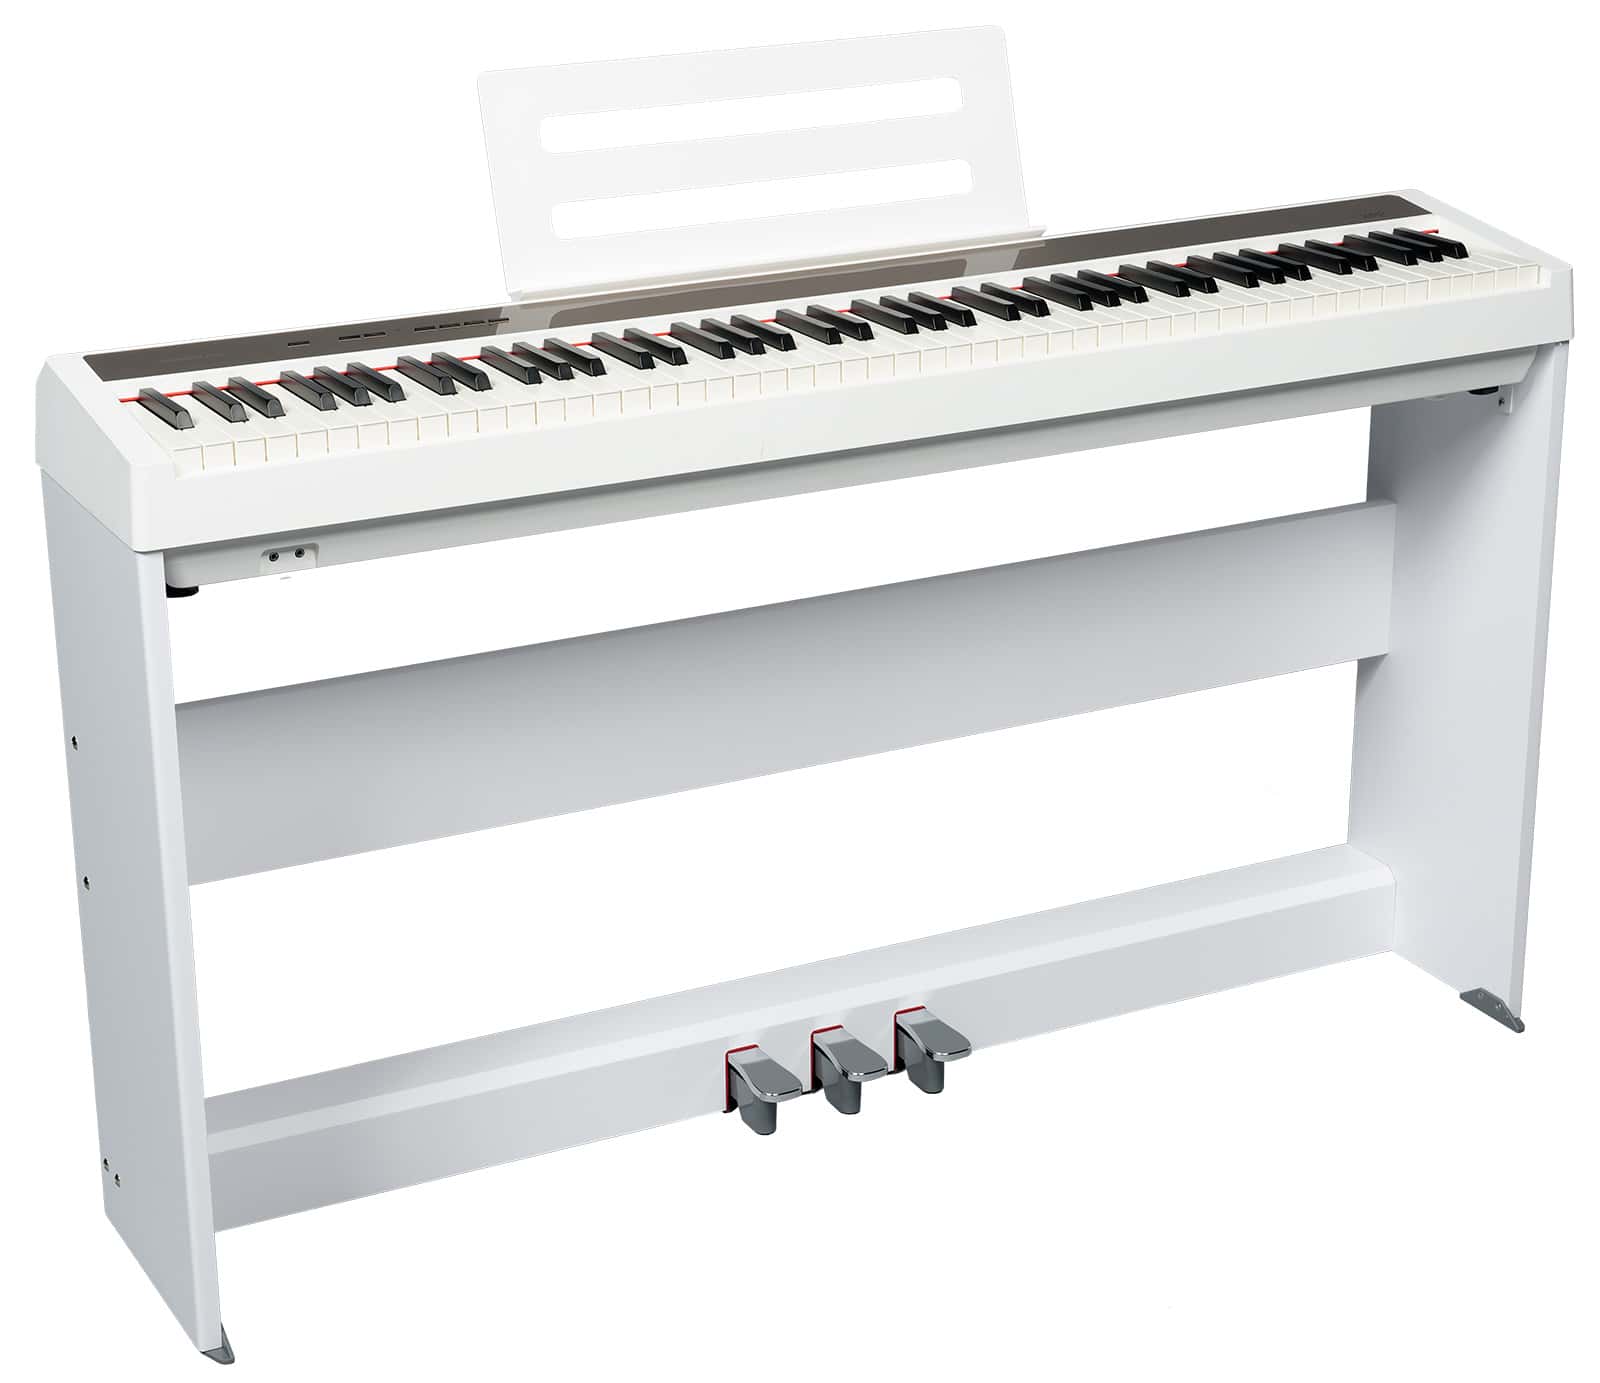 WOODBRASS XP2 WHITE DIGITAL PIANO WITH WHITE WOODEN STAND